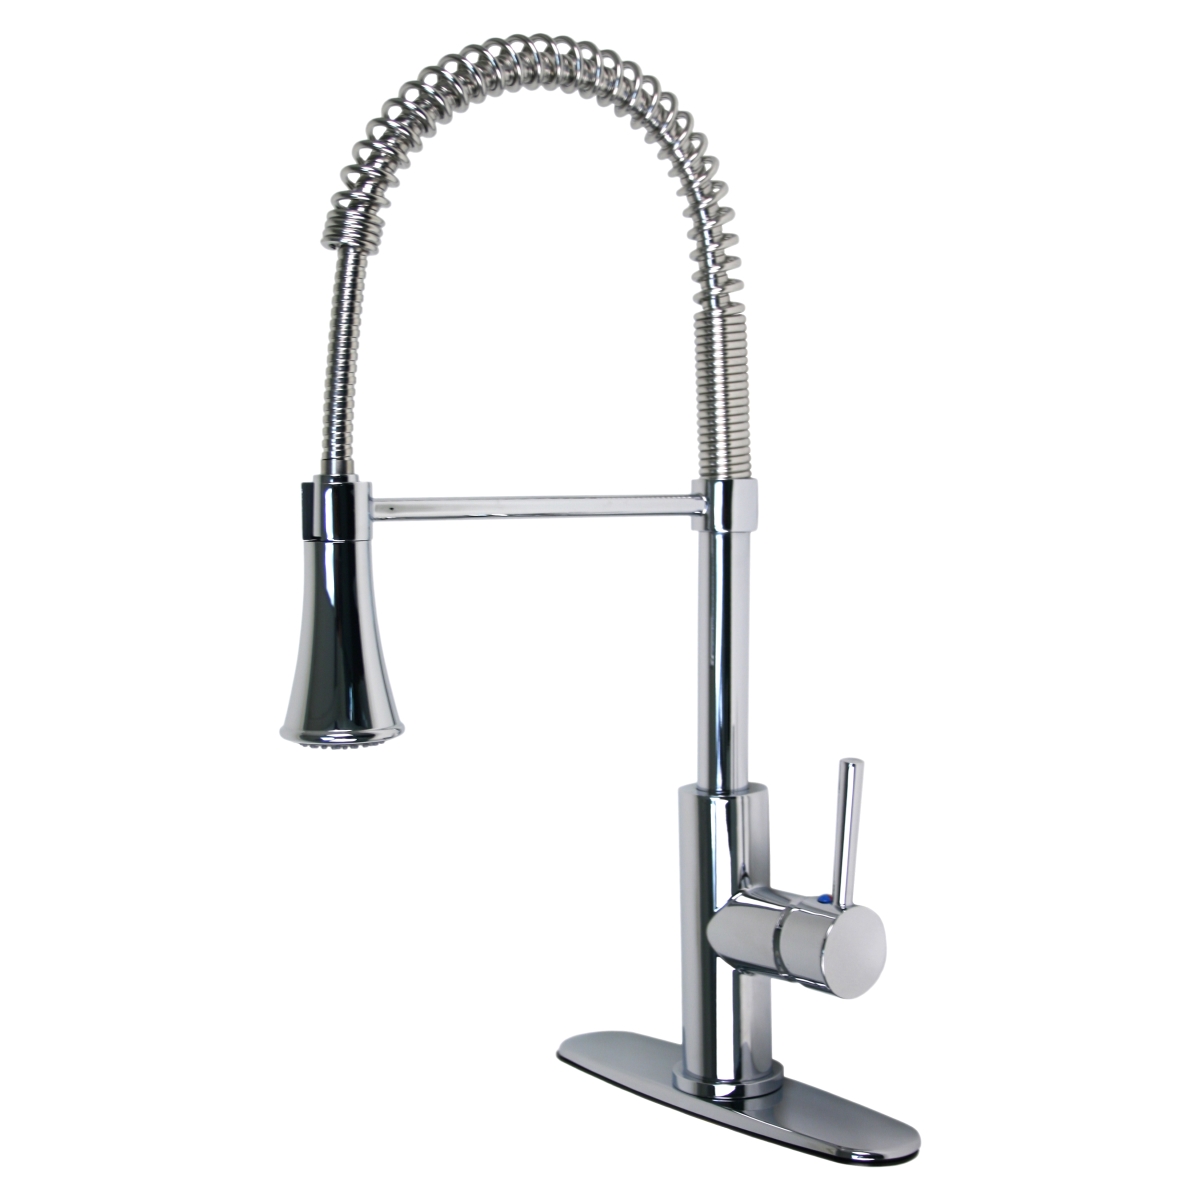 Uf17200 20.2 X 8.6 In. Chrome Single-handle Kitchen Faucet With Pull-down Spray